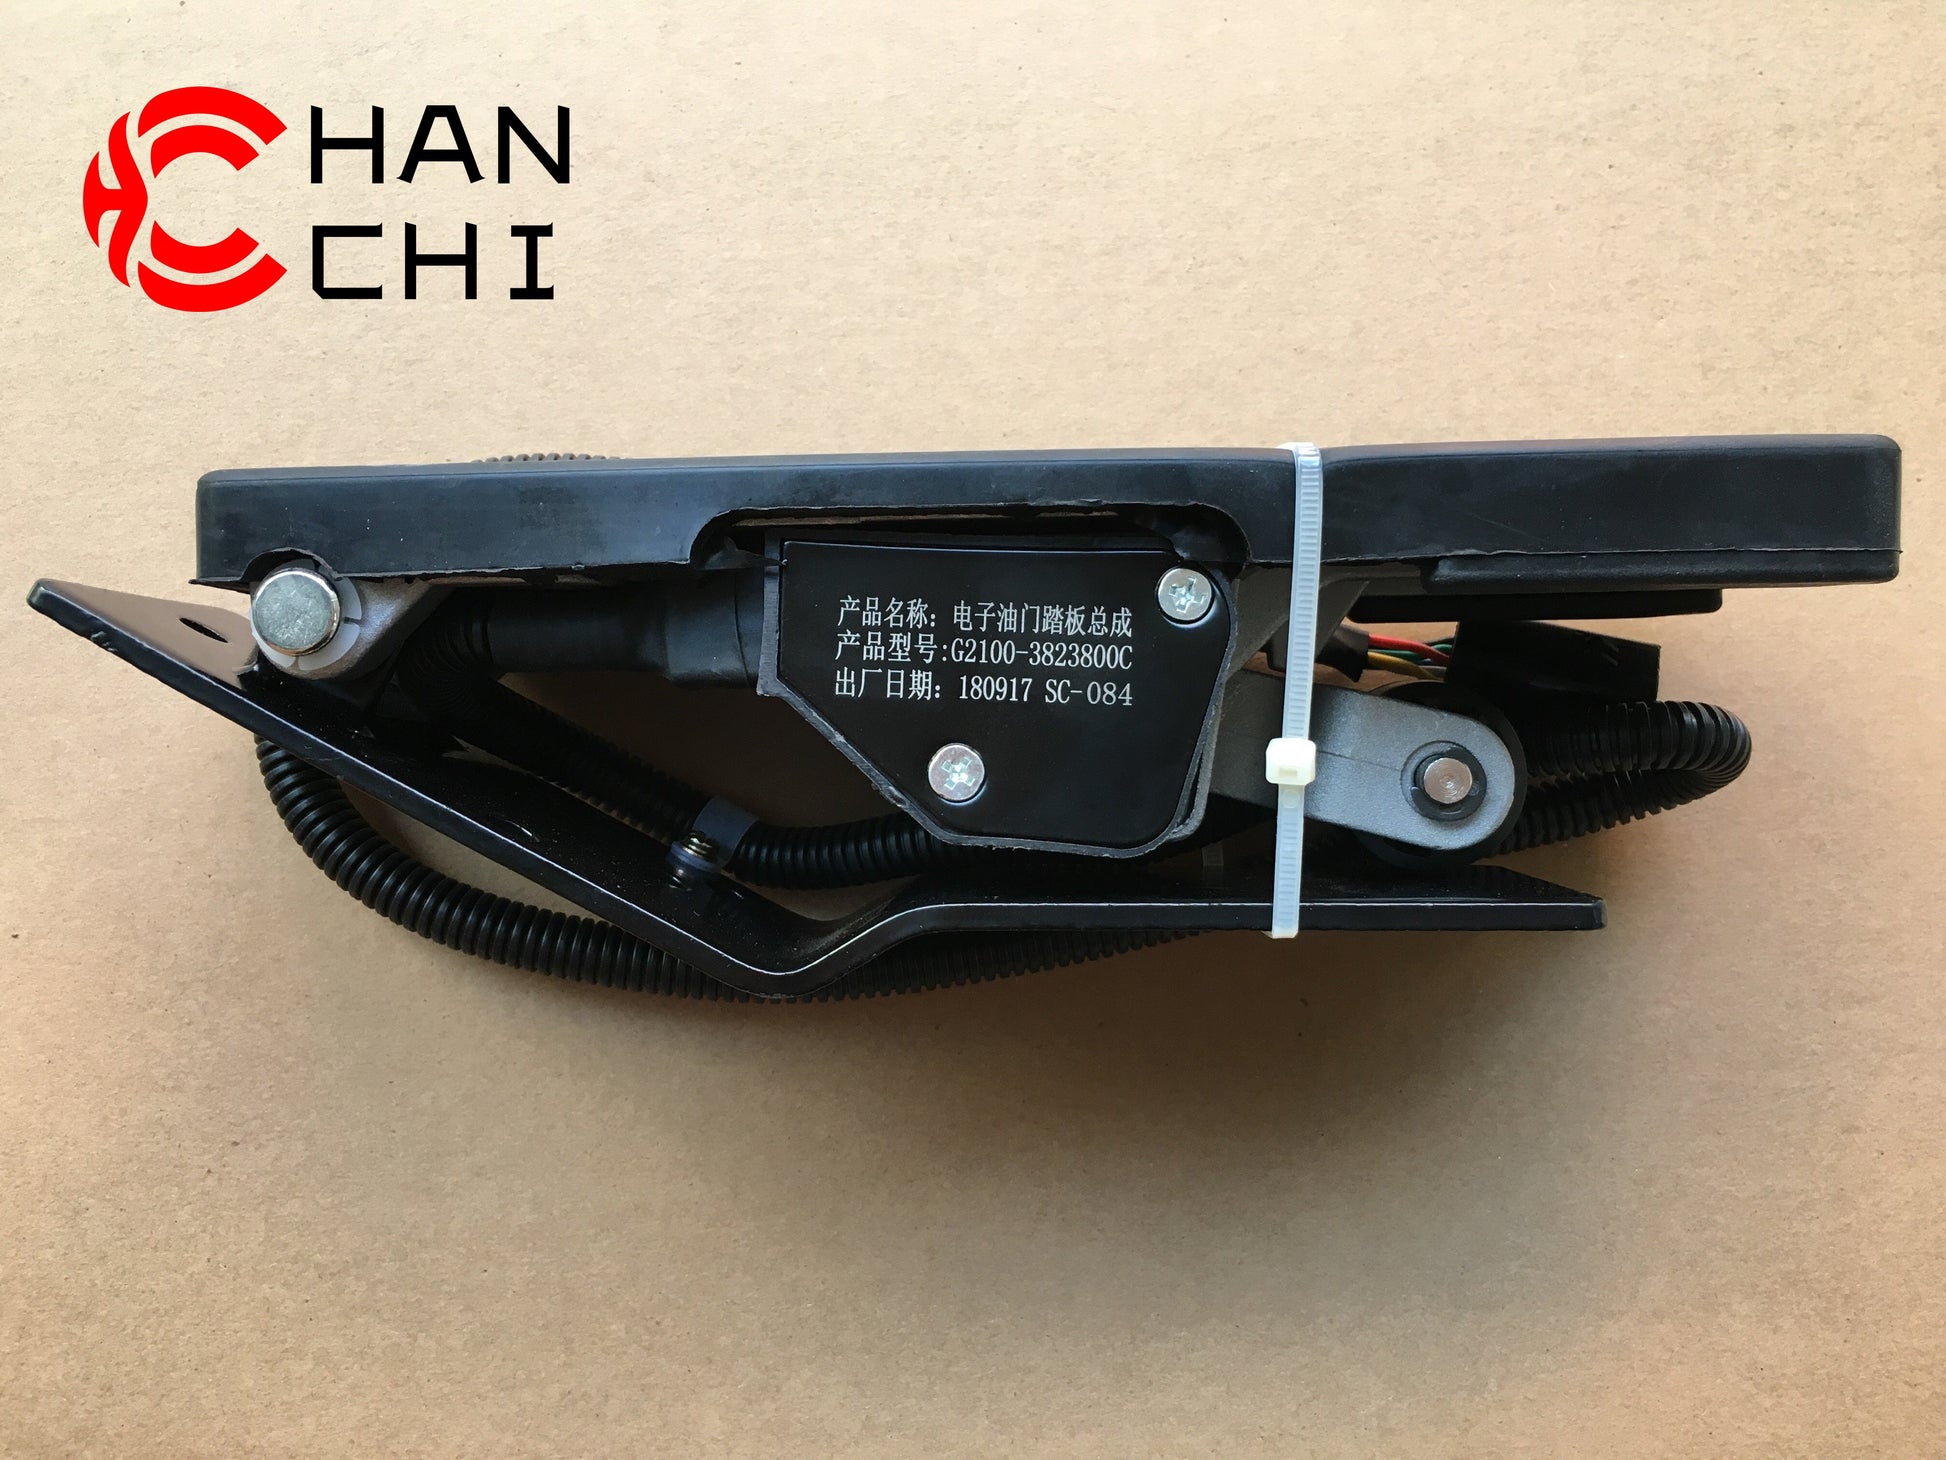 【Description】---☀Welcome to HANCHI☀---✔Good Quality✔Generally Applicability✔Competitive PriceEnjoy your shopping time↖（^ω^）↗【Features】Brand-New with High Quality for the Aftermarket.Totally mathced your need.**Stable Quality**High Precision**Easy Installation**【Specification】OEM：G2100-3823800CMaterial：ABSColor：blackOrigin：Made in ChinaWeight：1000g【Packing List】1* Electronic Accelerator Pedal 【More Service】 We can provide OEM service We can Be your one-step solution for Auto Parts We can provide 